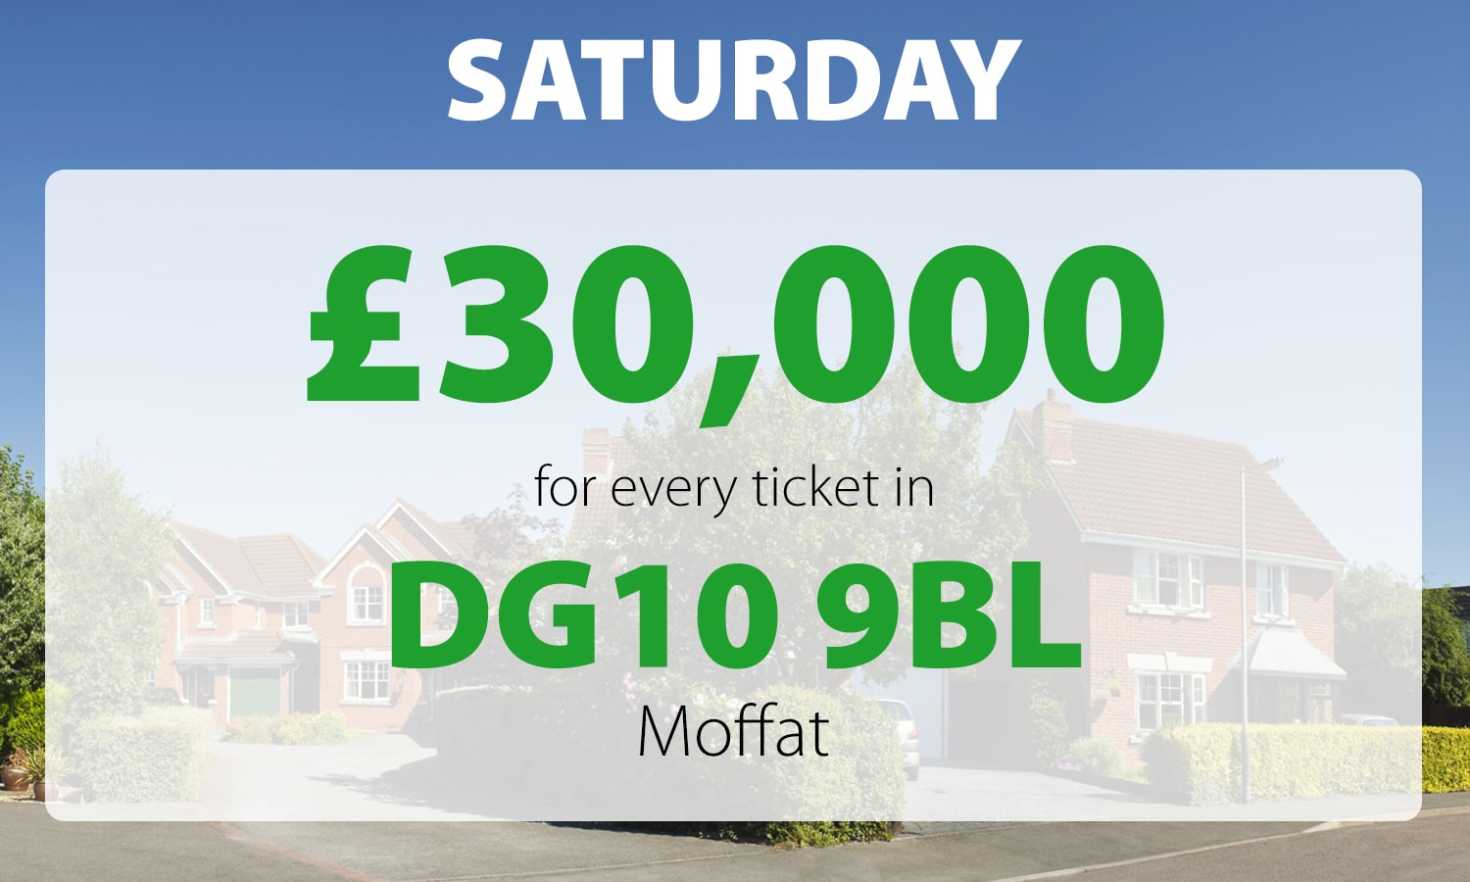 One lucky Moffat player has picked up a £30,000 prize today thanks to their postcode